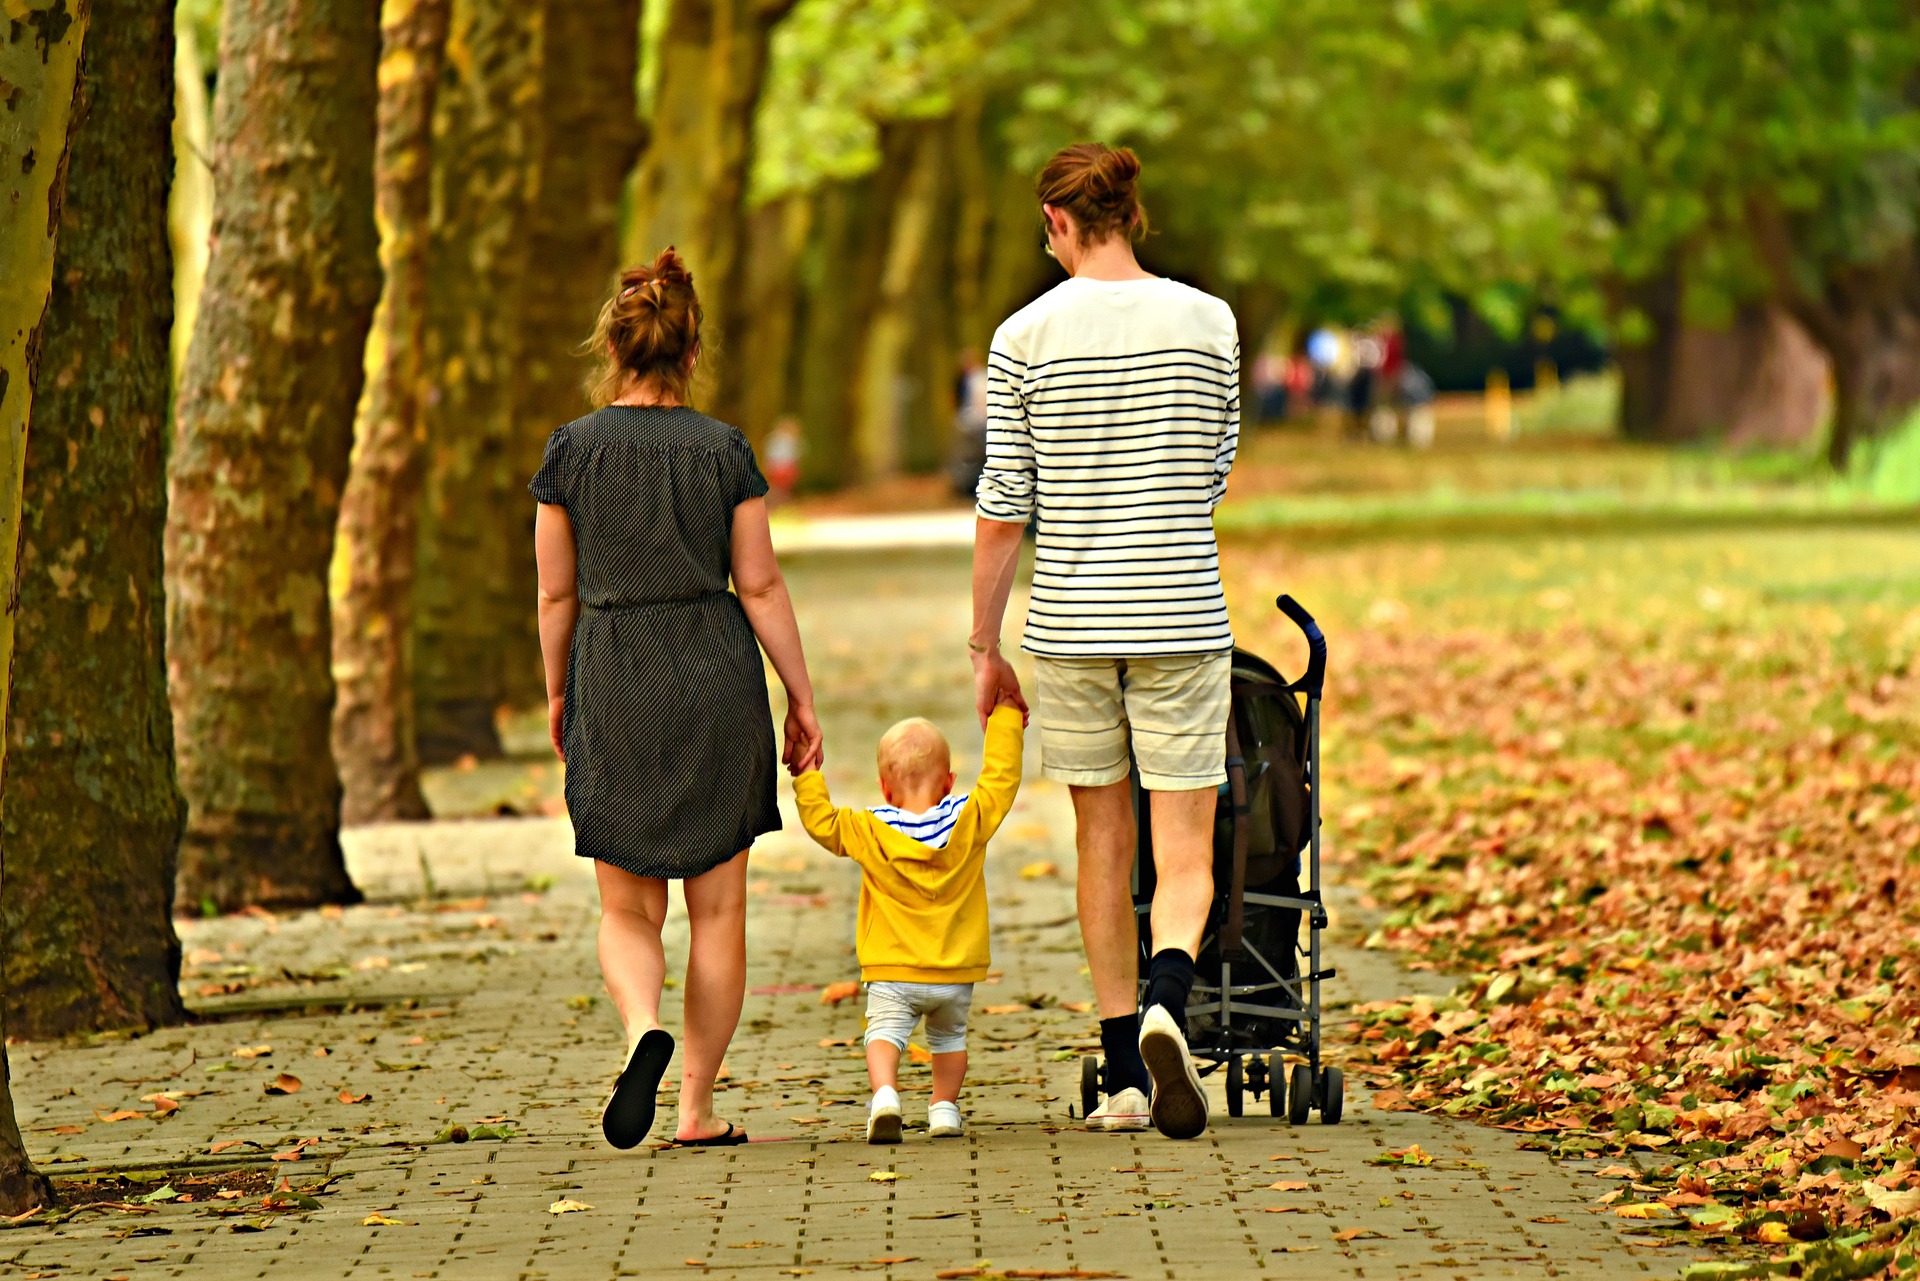 Number of Days of Paternity Leave Doubles in Hungary